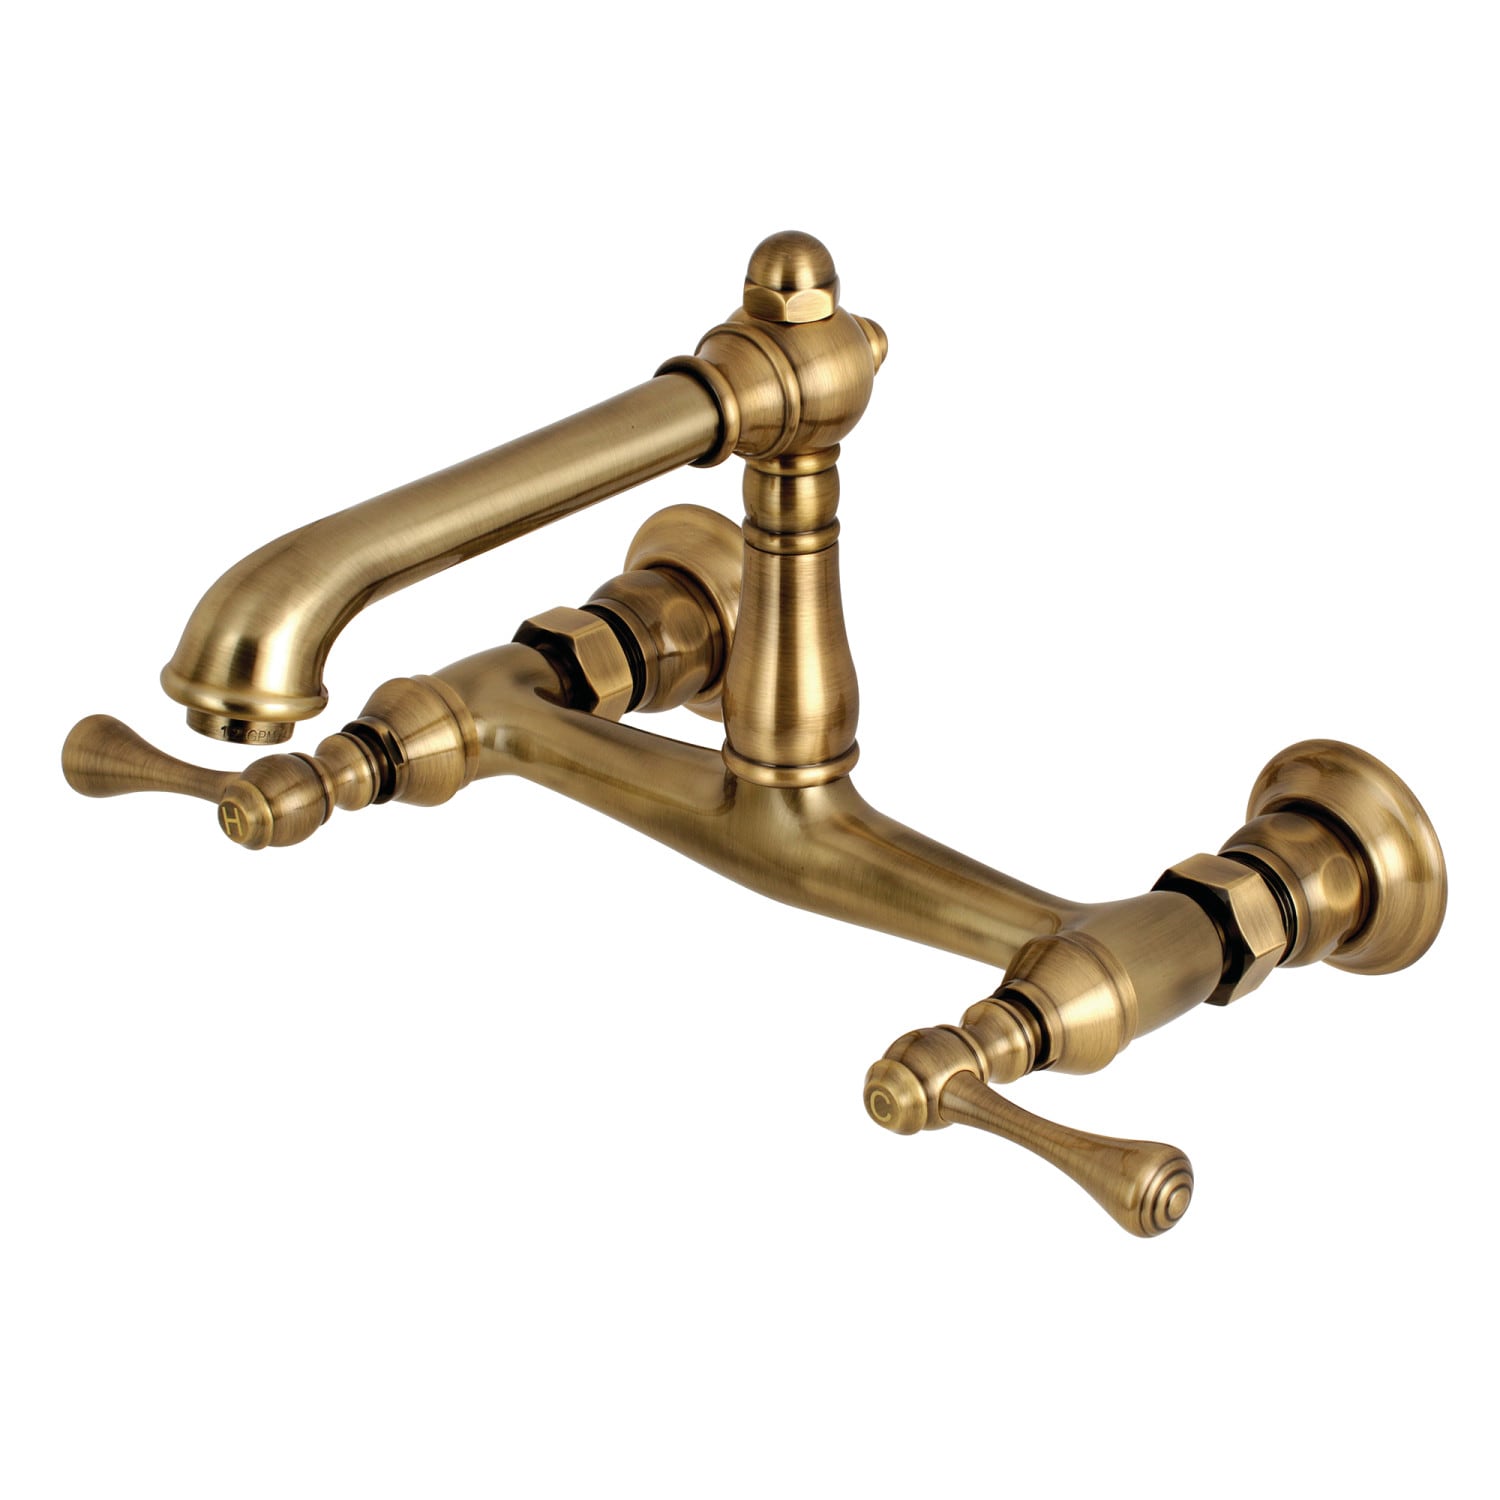 English Country Bathroom Sink Faucets at Lowes.com